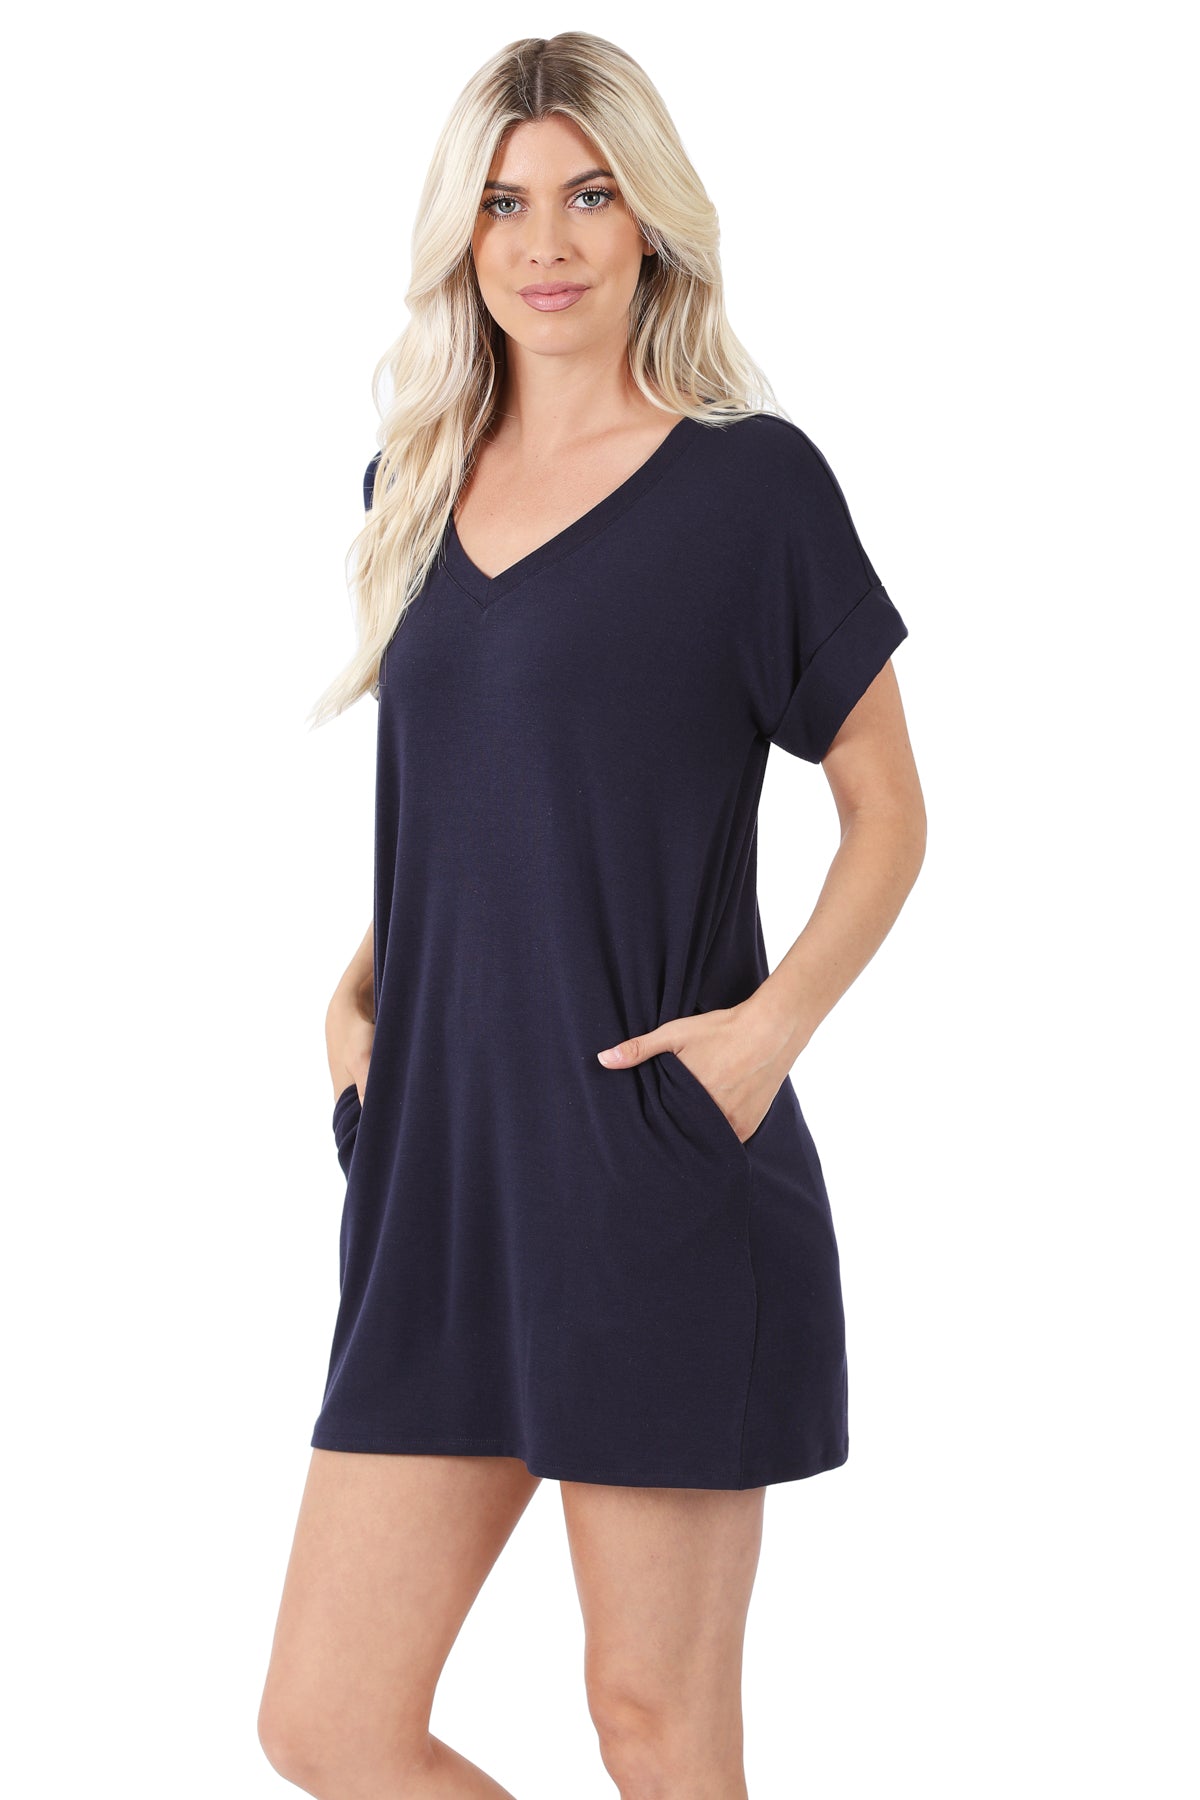 Women V-Neck Rolled Up Short Sleeve Longline Top Tunic with Side Pockets